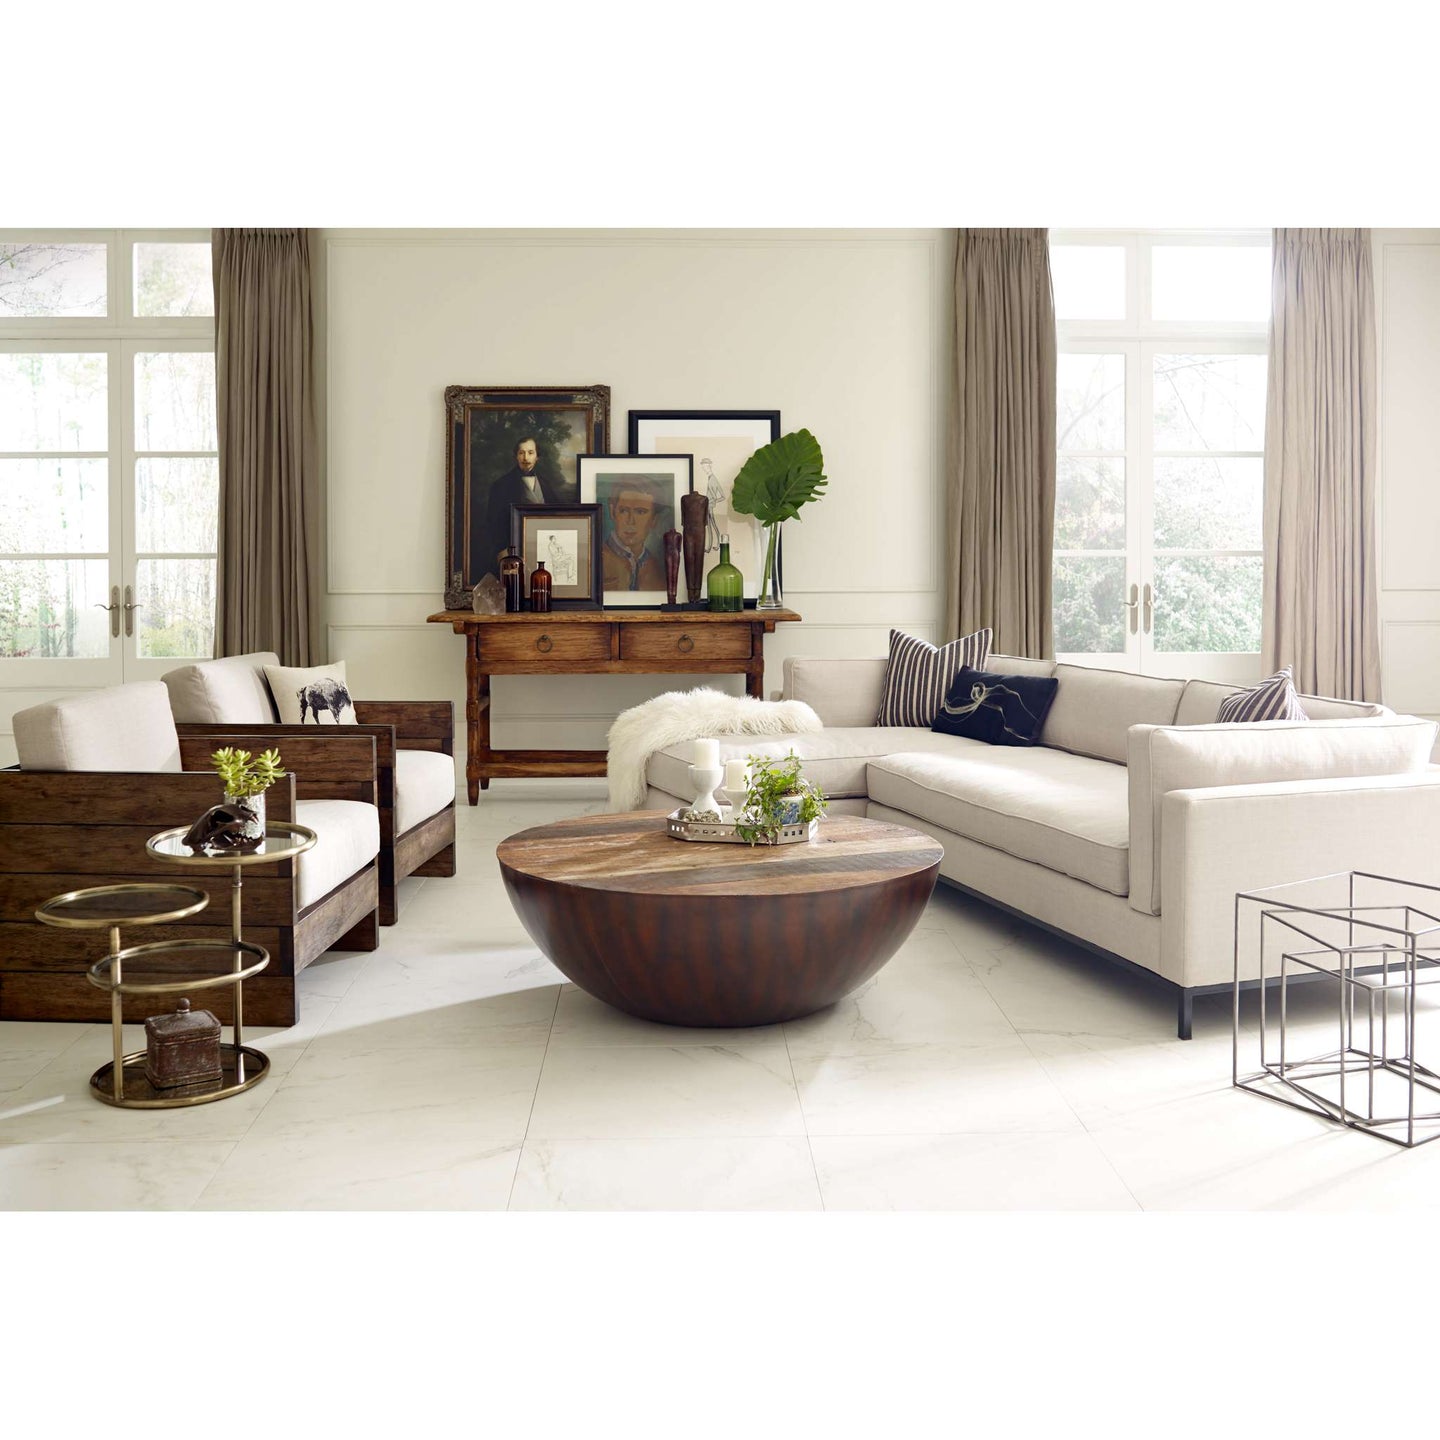 Grammercy 2 Pc Sectional Laf Chaise